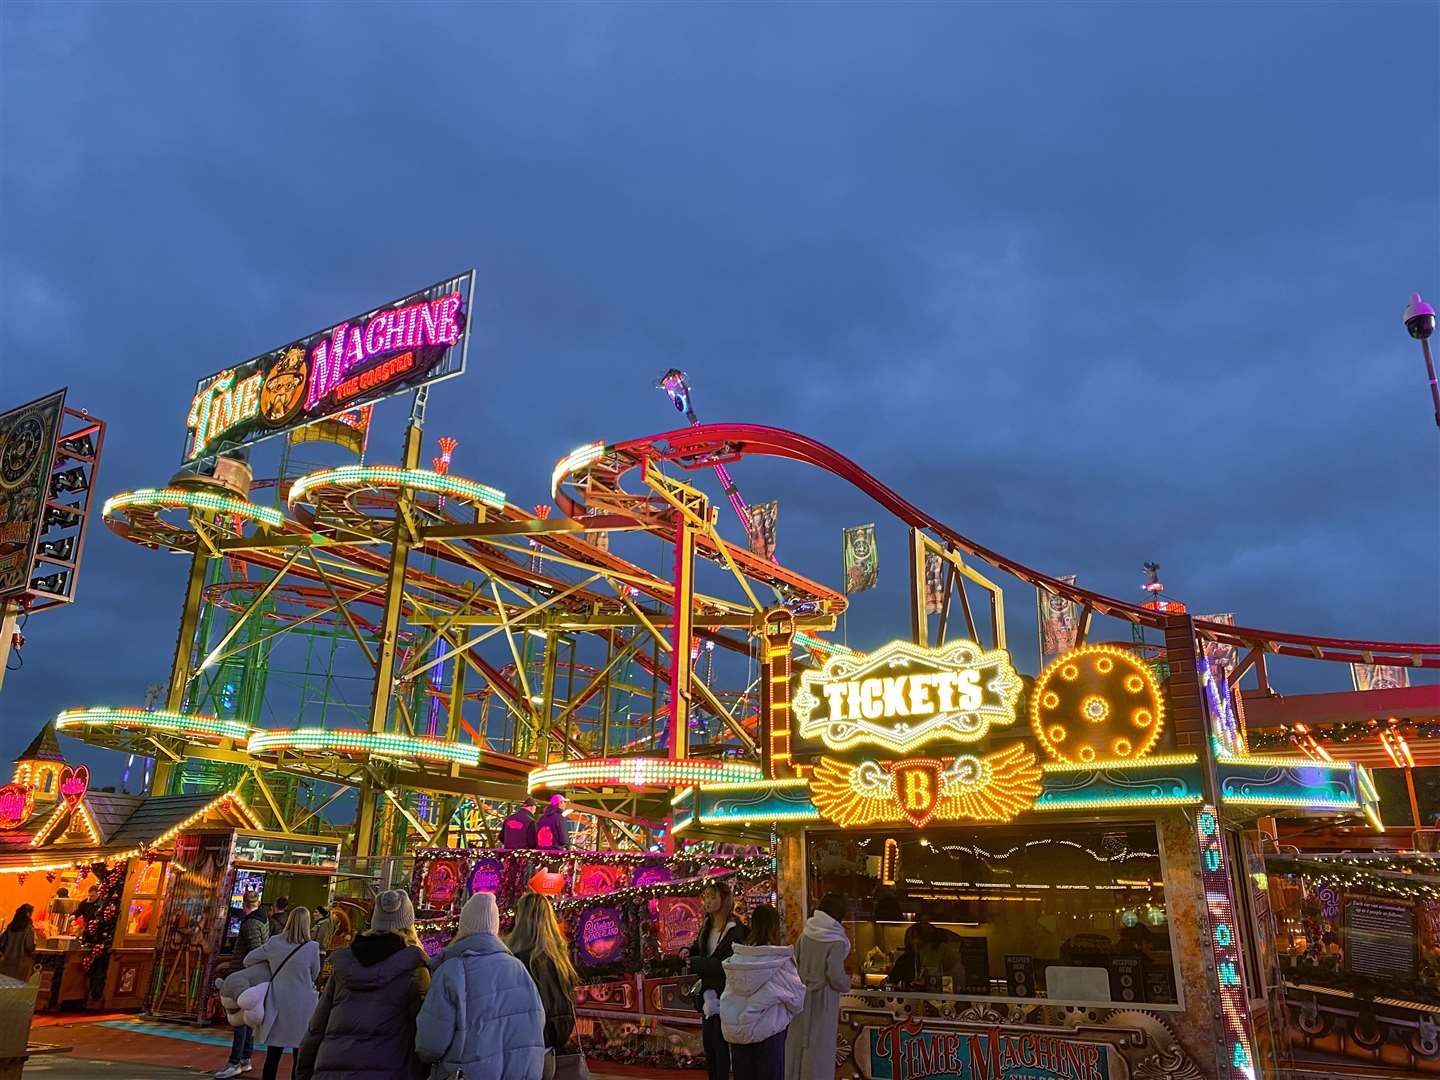 The rides and attractions look impressive in the dark, but make it feel more carnival than Christmas